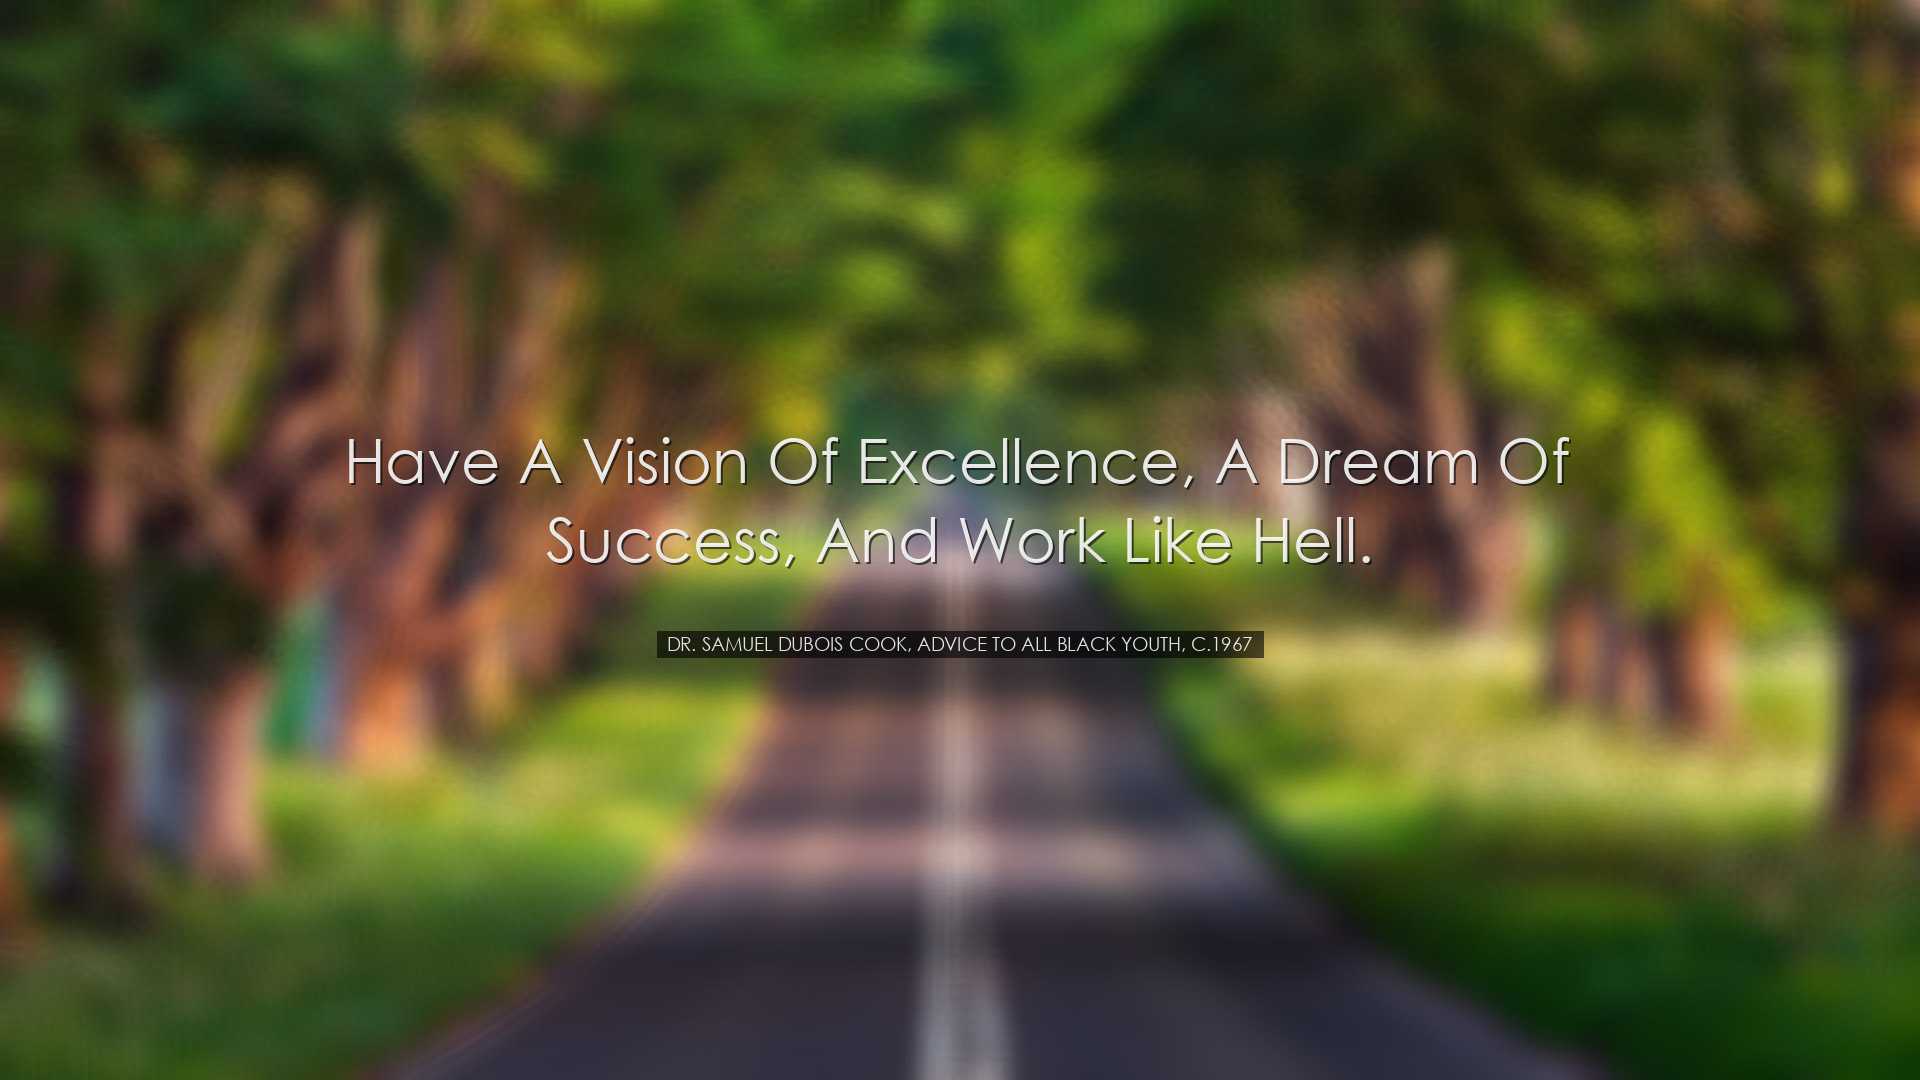 Have a vision of excellence, a dream of success, and work like hel